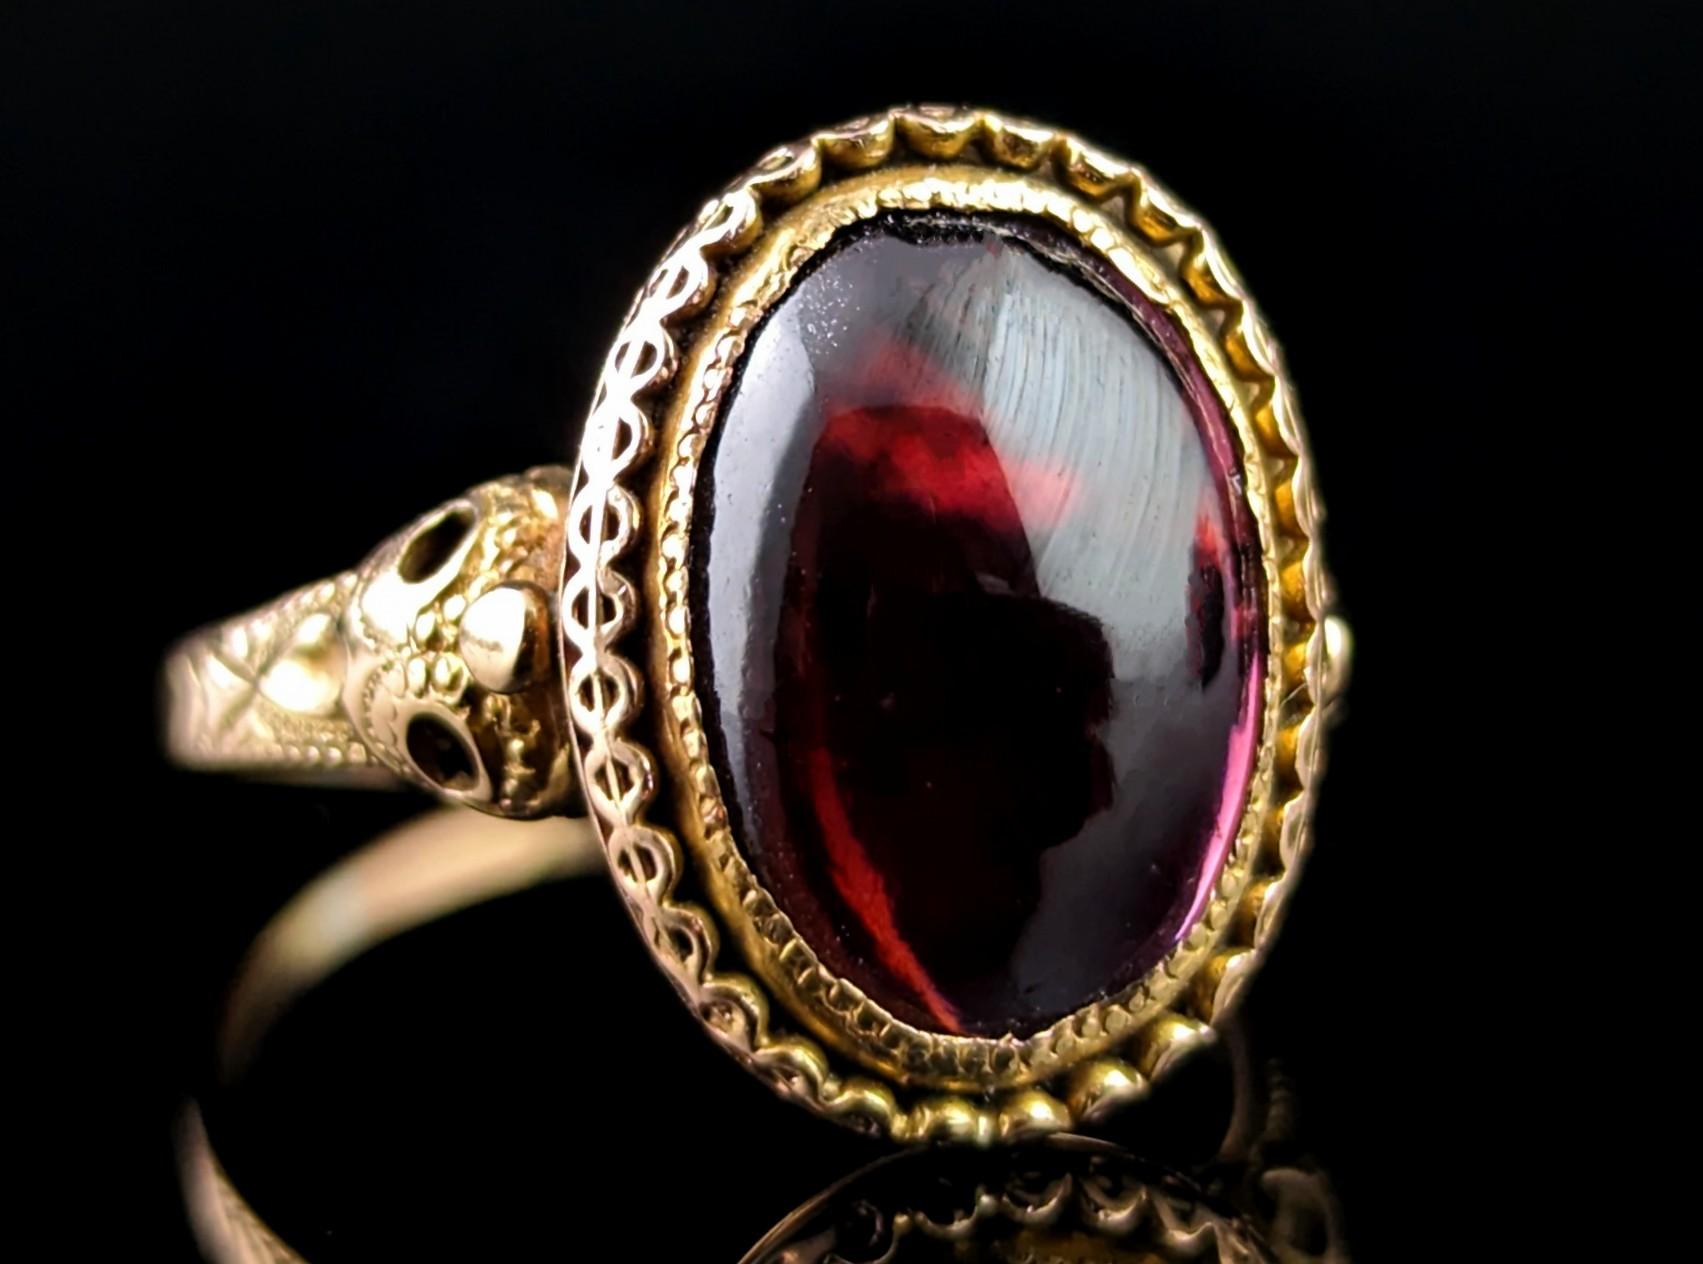 This handsome antique 18ct gold Garnet cabochon ring has a little hidden secret.

Those magnificently designed shoulders feature a bird mask design, very unique and surely a specially commissioned piece.

When turned on its side you can see the